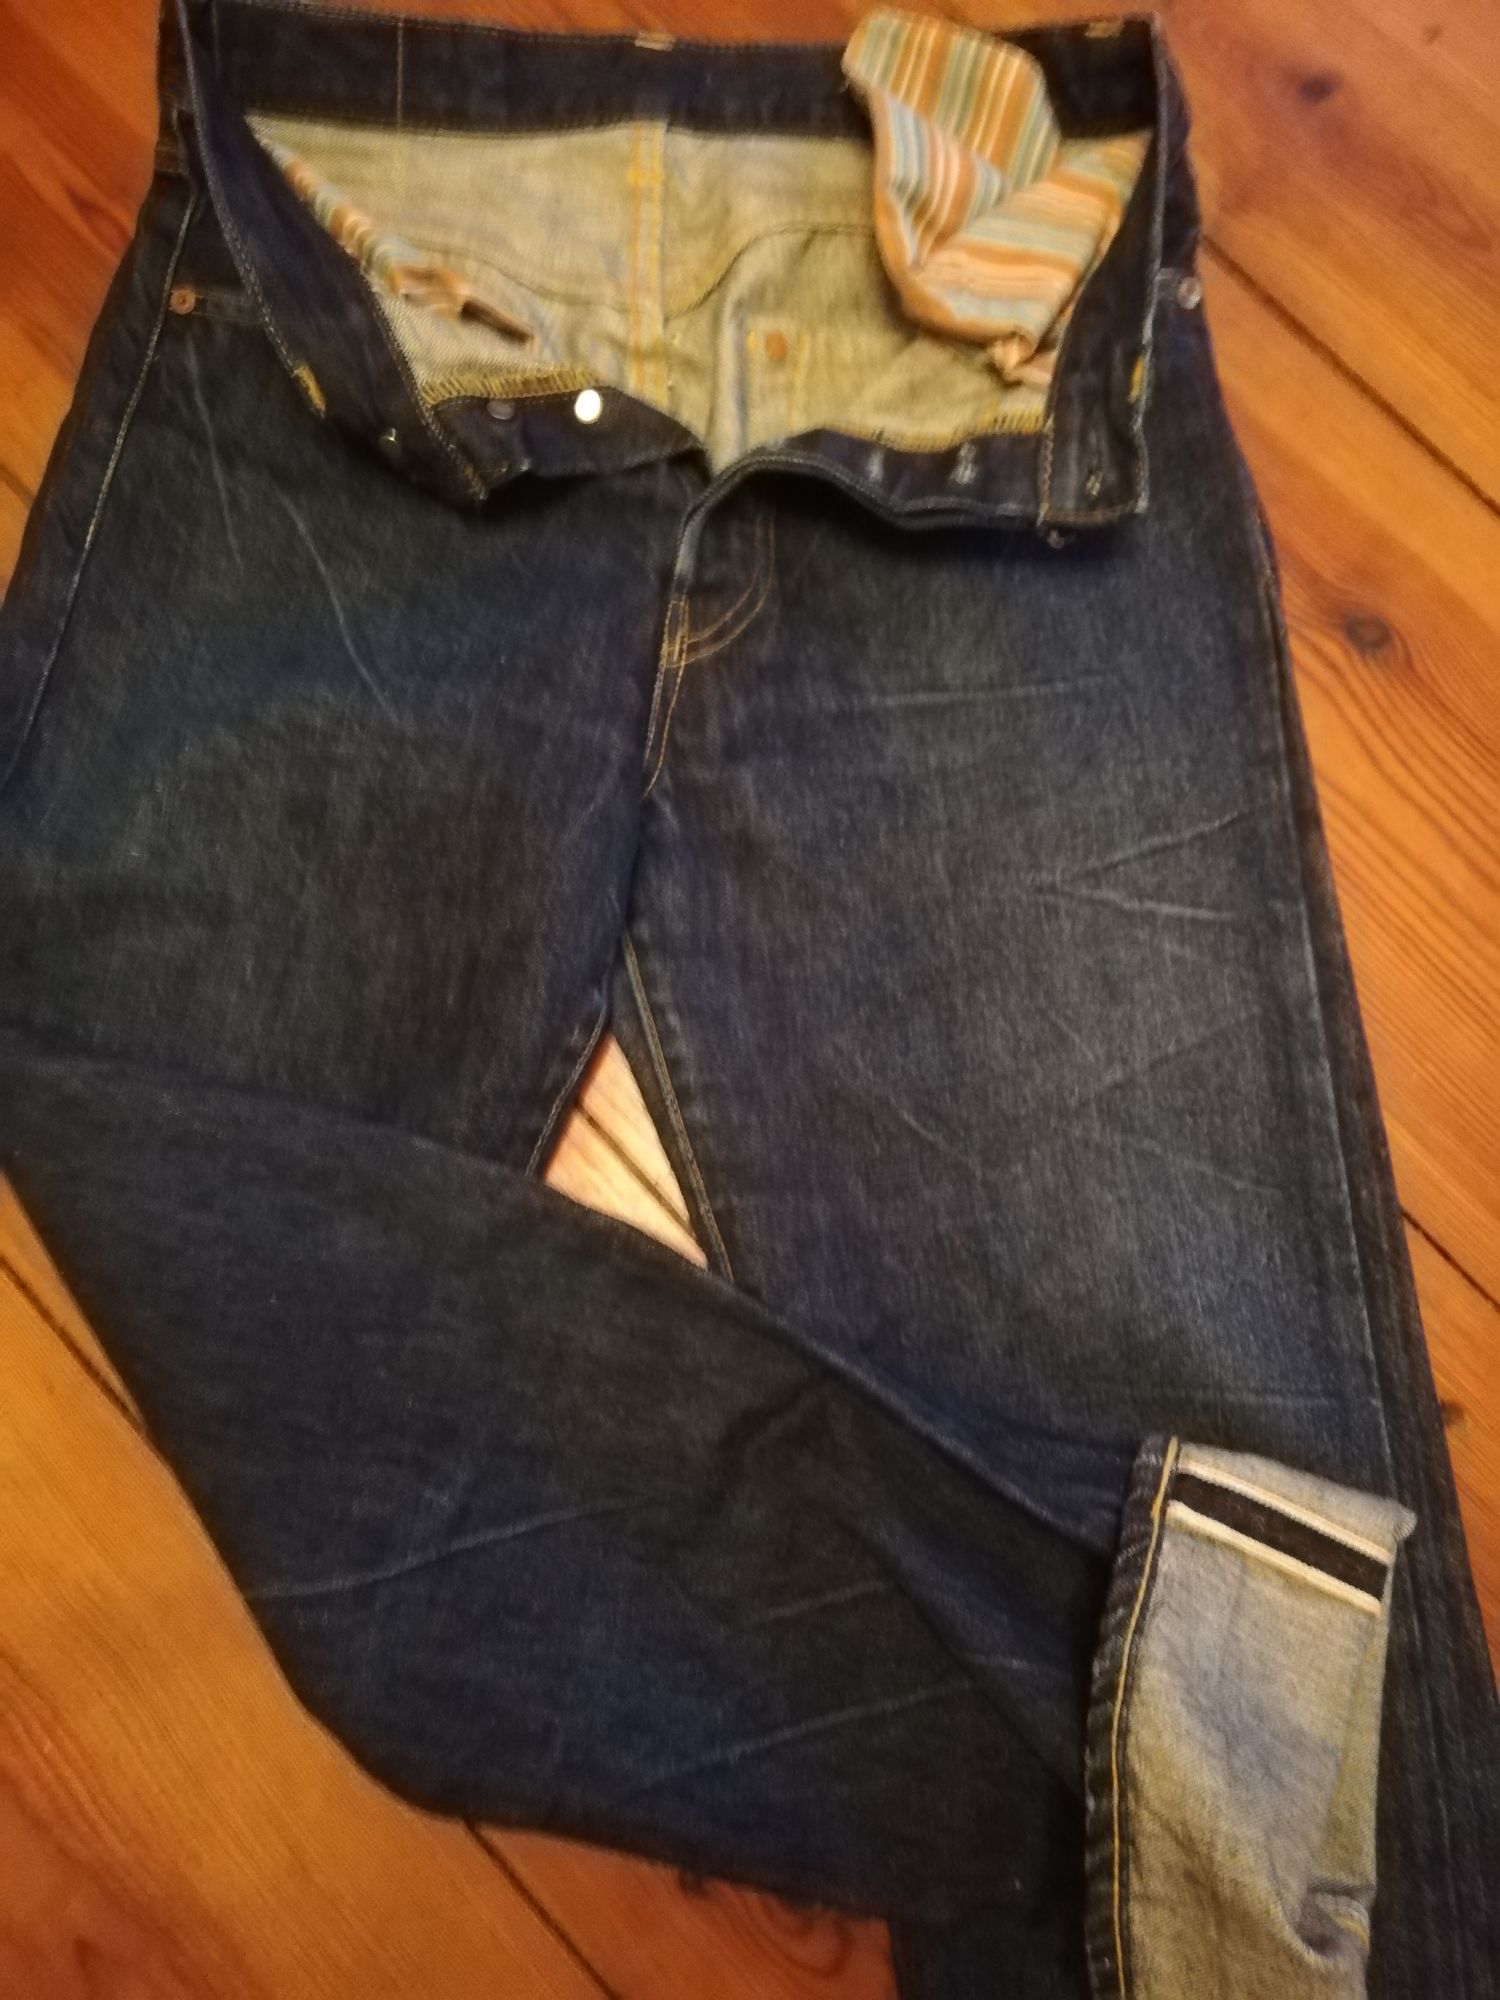 Fade Friday - LVC 1944 501xx (7 Years, 1 Month, 4 Washes)